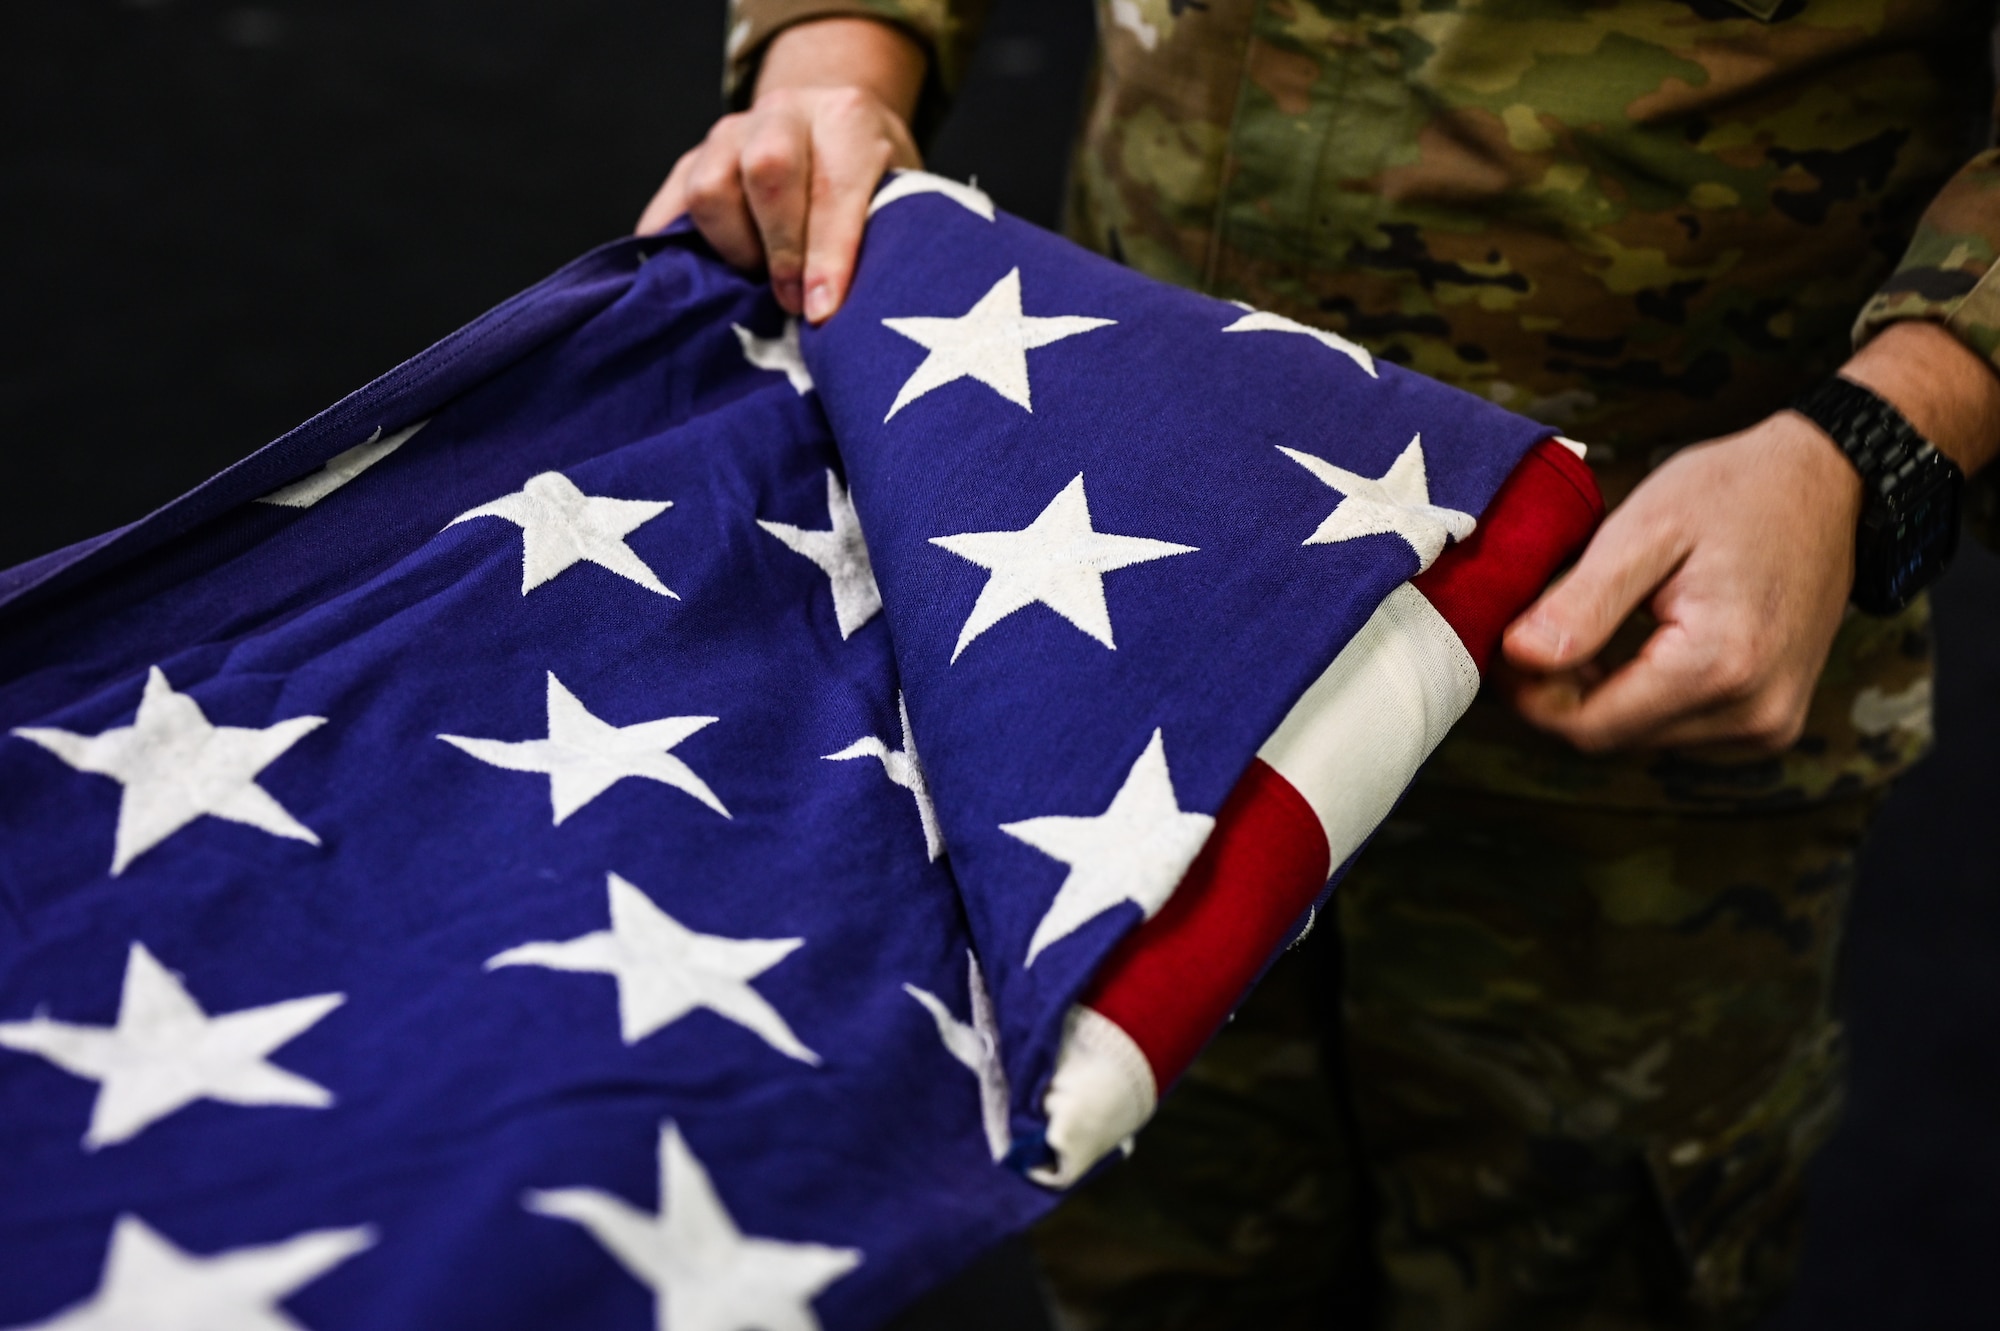 U.S. Air Force Airman 1st Class Devin Radford, 47th Operations Support Squadron aircrew flight equipment specialist, folds a flag during a Base Honor Guard practice at Laughlin Air Force Base, Texas, on Jan. 24, 2023. The American flag is folded in a particular way to symbolize important aspects of the flag and the nation it represents. (U.S. Air Force photo by Airman 1st Class Keira Rossman)